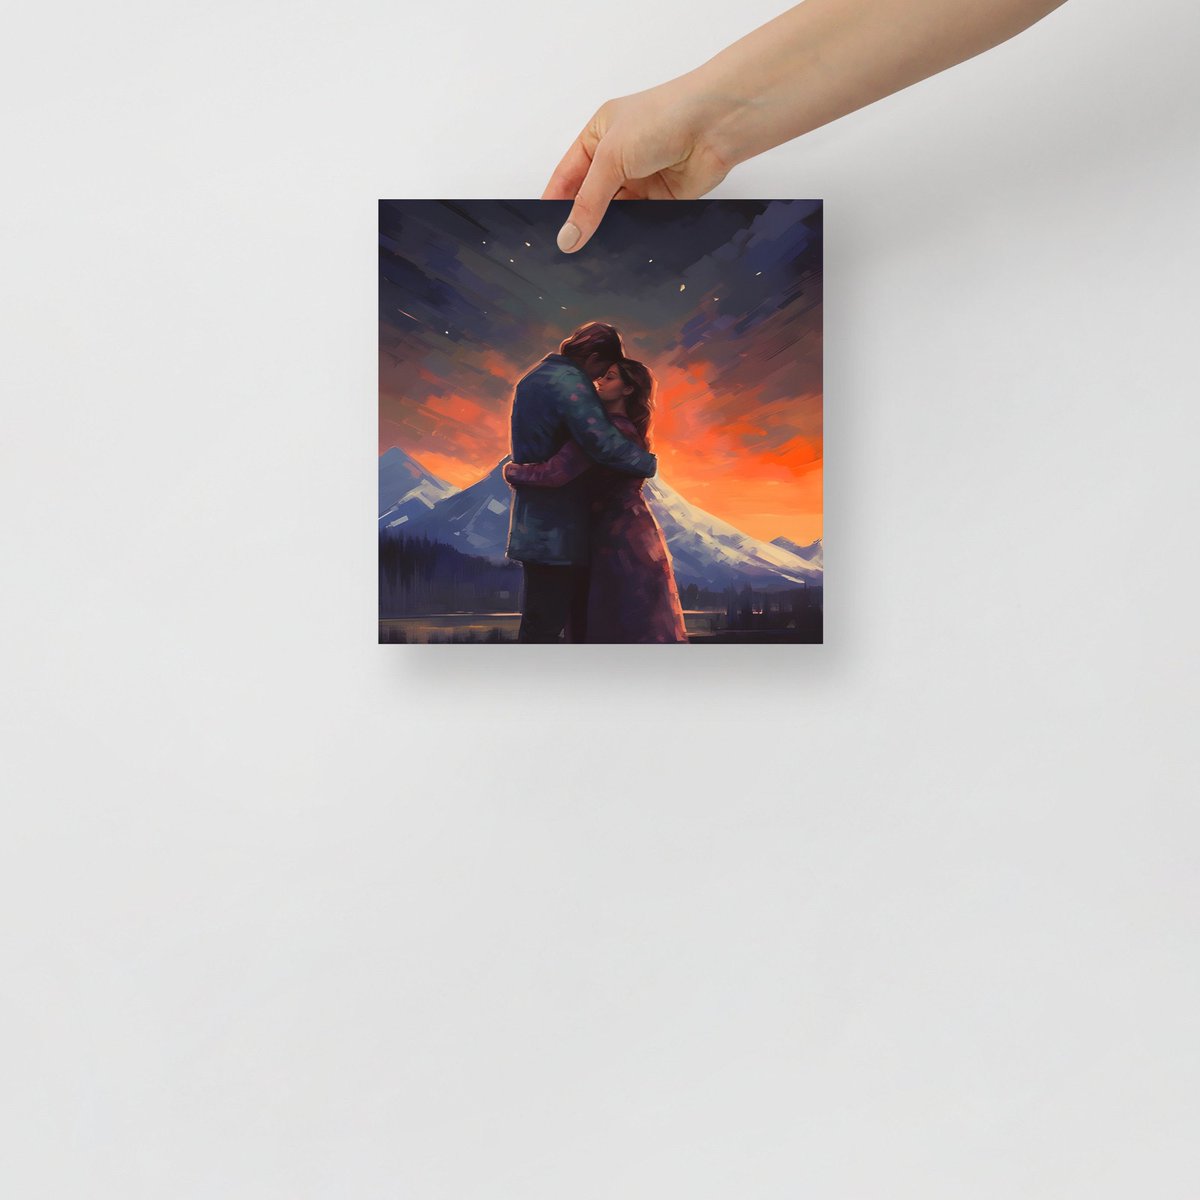 Excited to share the latest addition to my #etsy shop: Romantic Poster Print - Man and Woman Embrace in Mountain View etsy.me/3O3Fazw #posterlove #romanticdecor #mountainview #coupleembrace #wallart #mattepaper #museumquality #manandwoman #homedecor